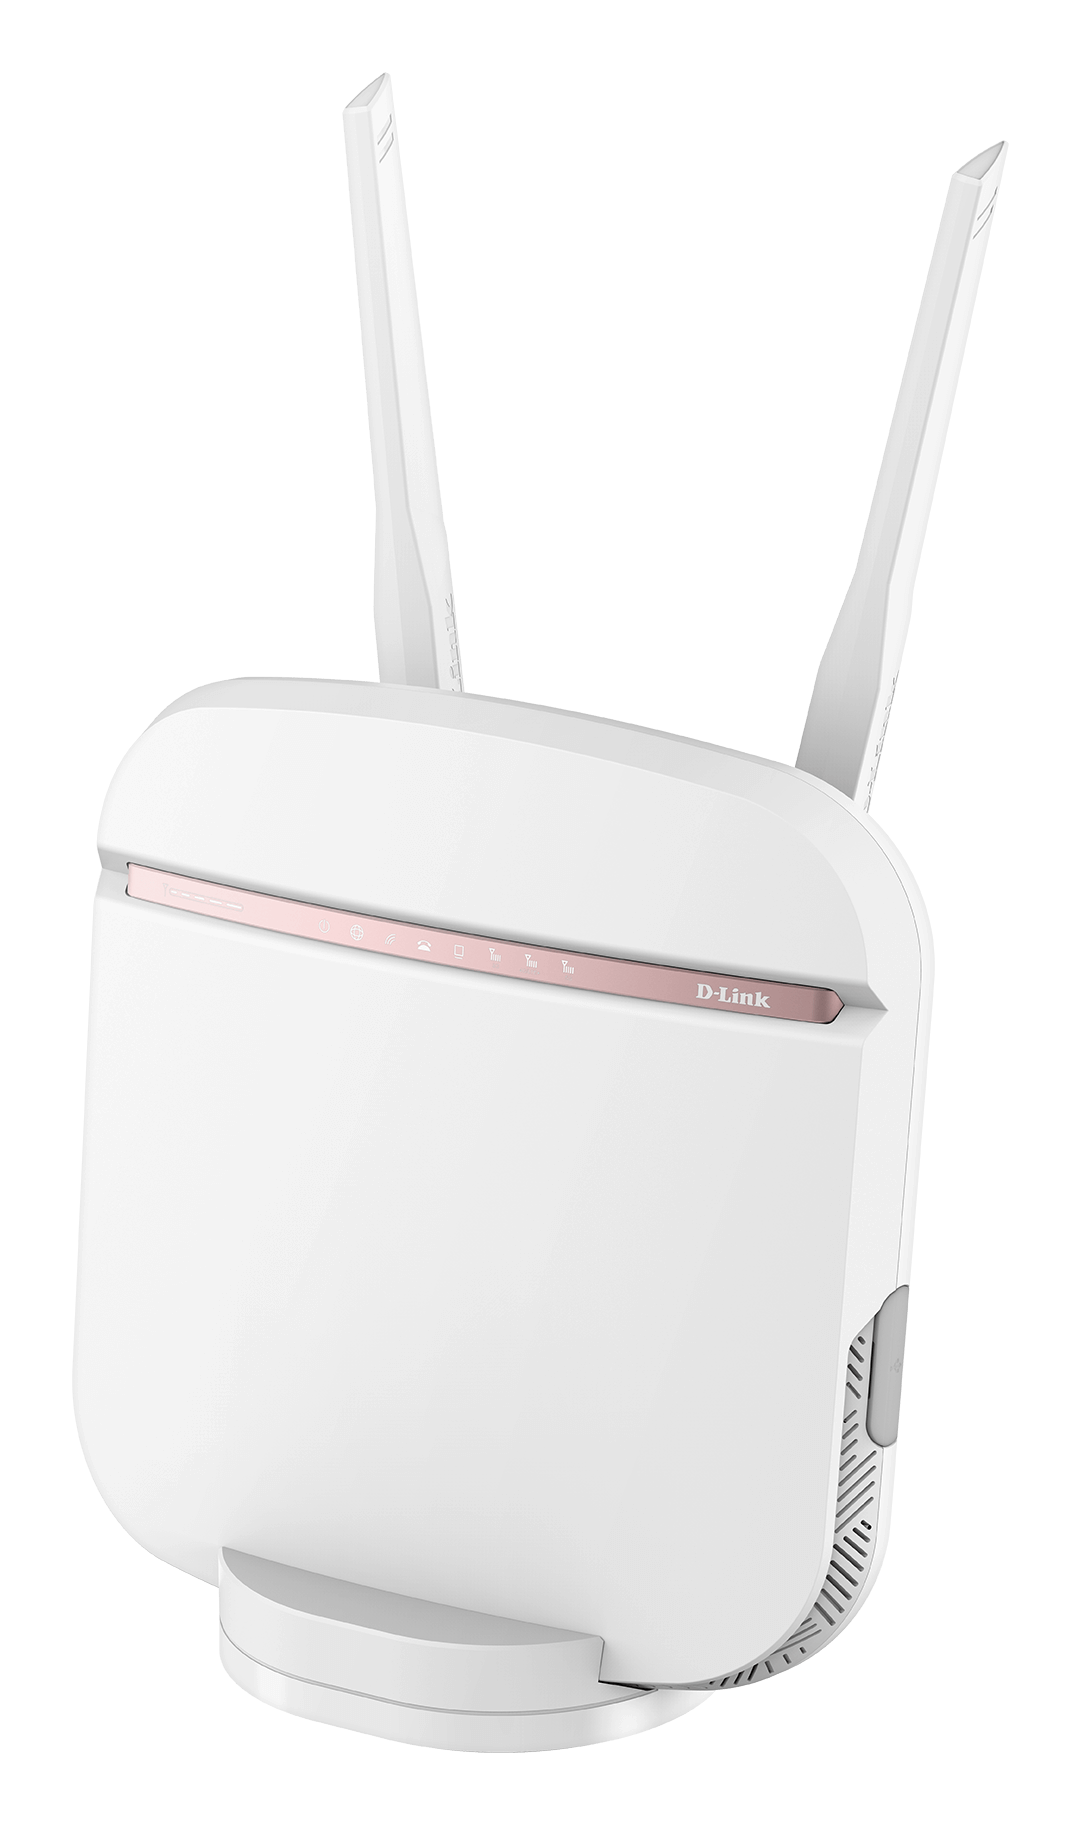 Geonix Introduces 5G SIM-Supported Router to Bridge the